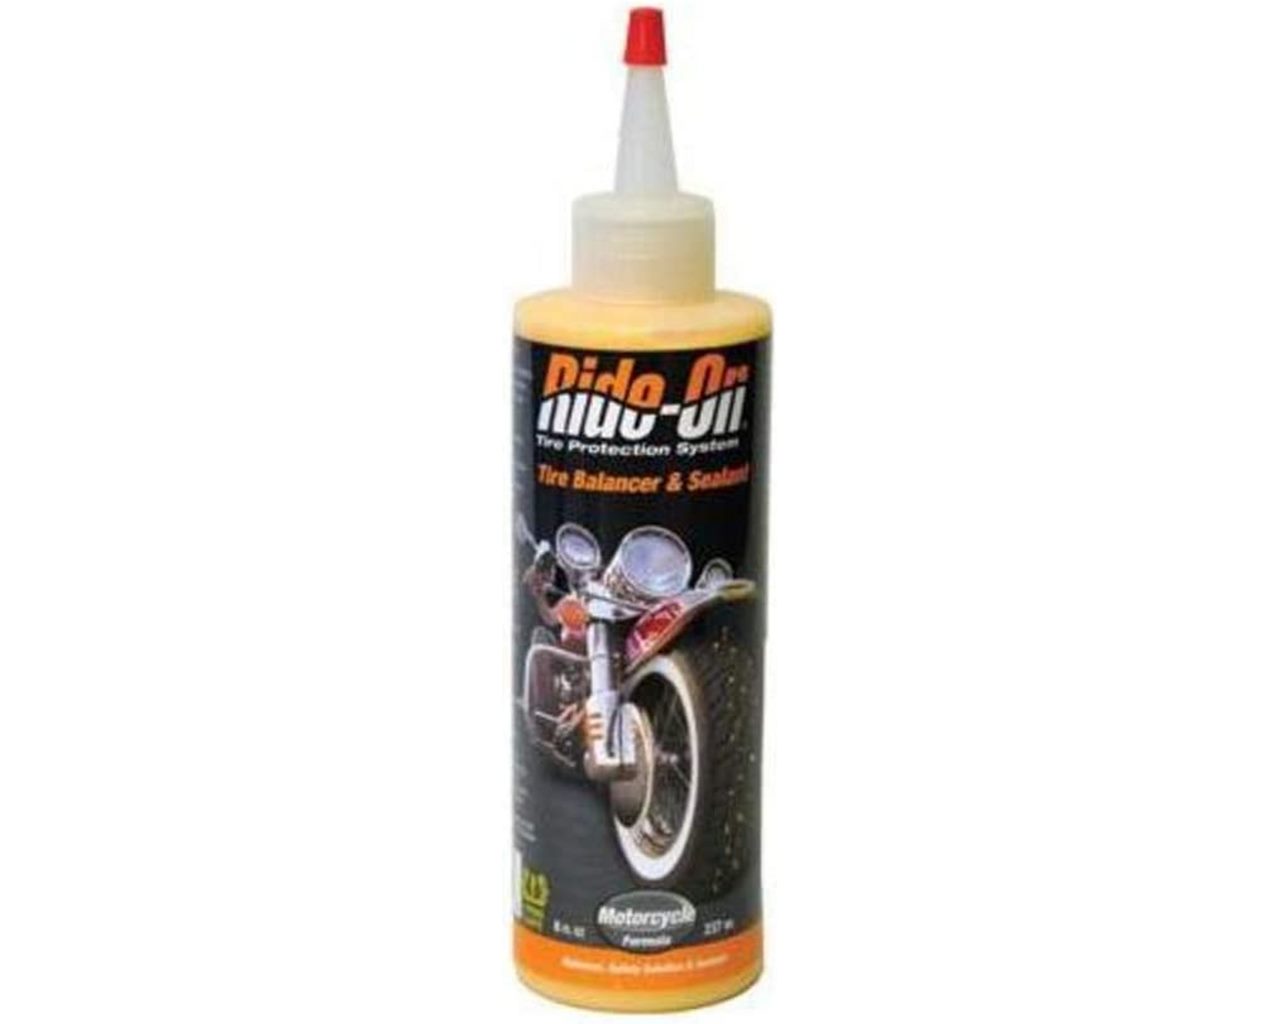 WPS Ride-On Tire Sealant and Balancer 8oz Bottle 85-4200